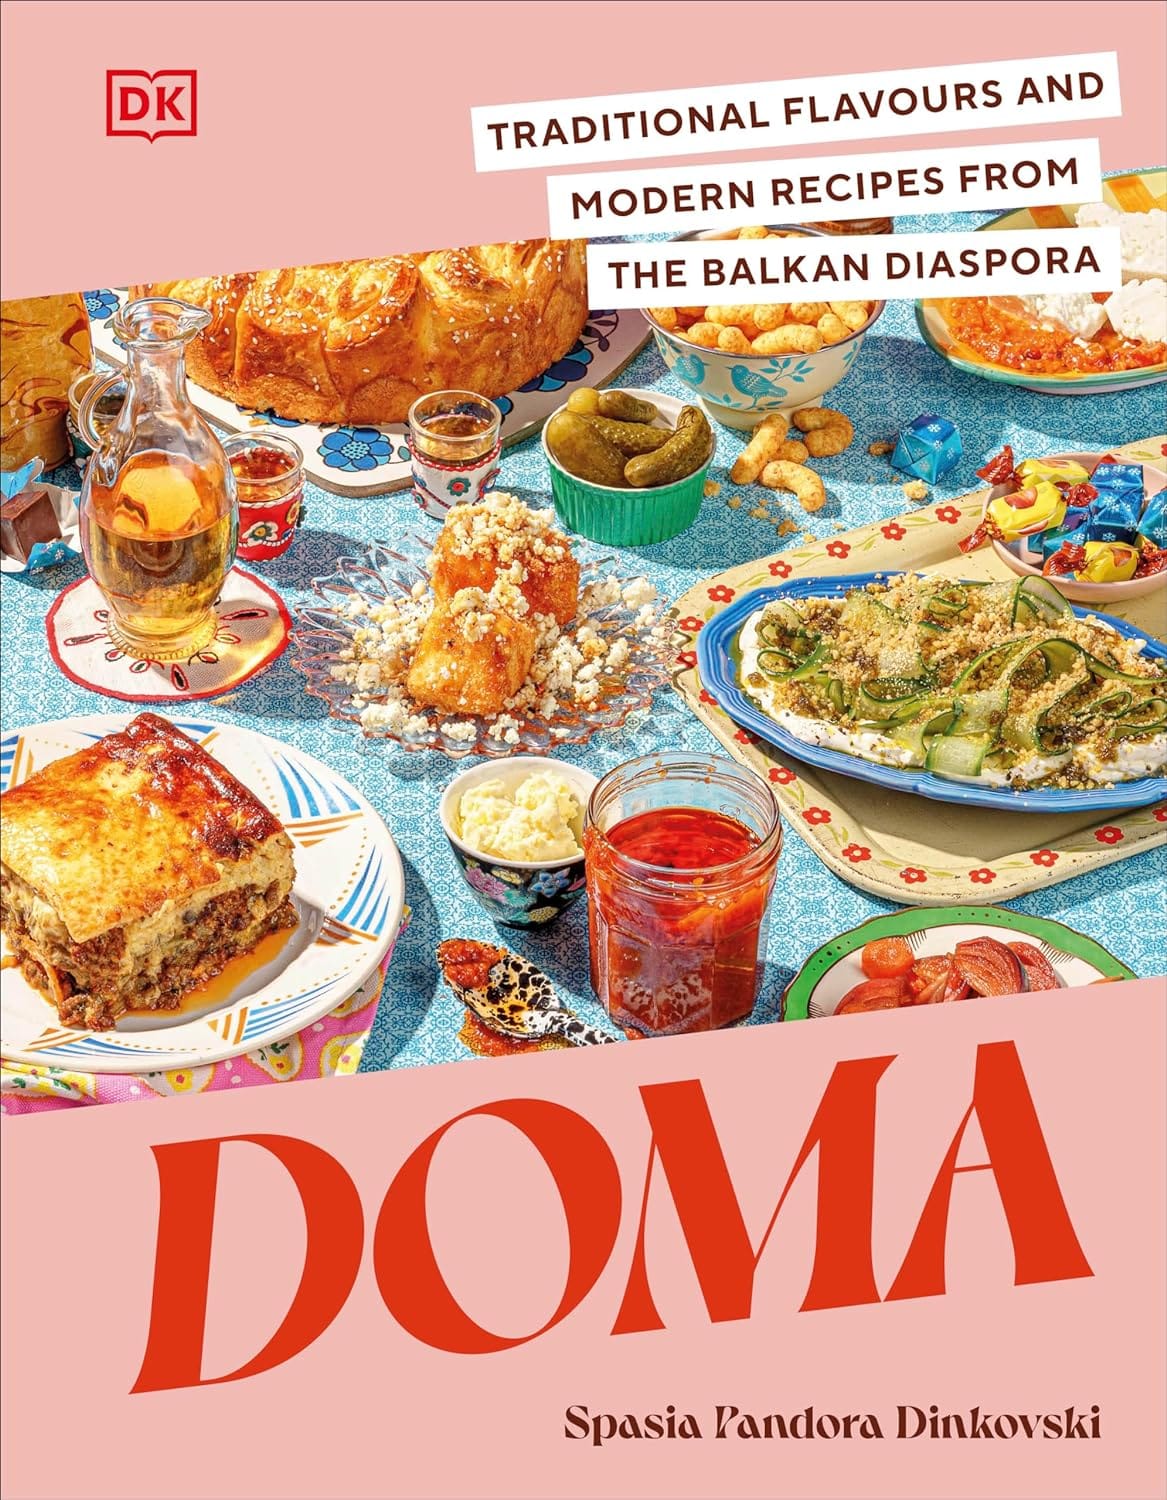 Doma: Traditional Flavours and Modern Recipes from the Balkan Diaspora Hardcover